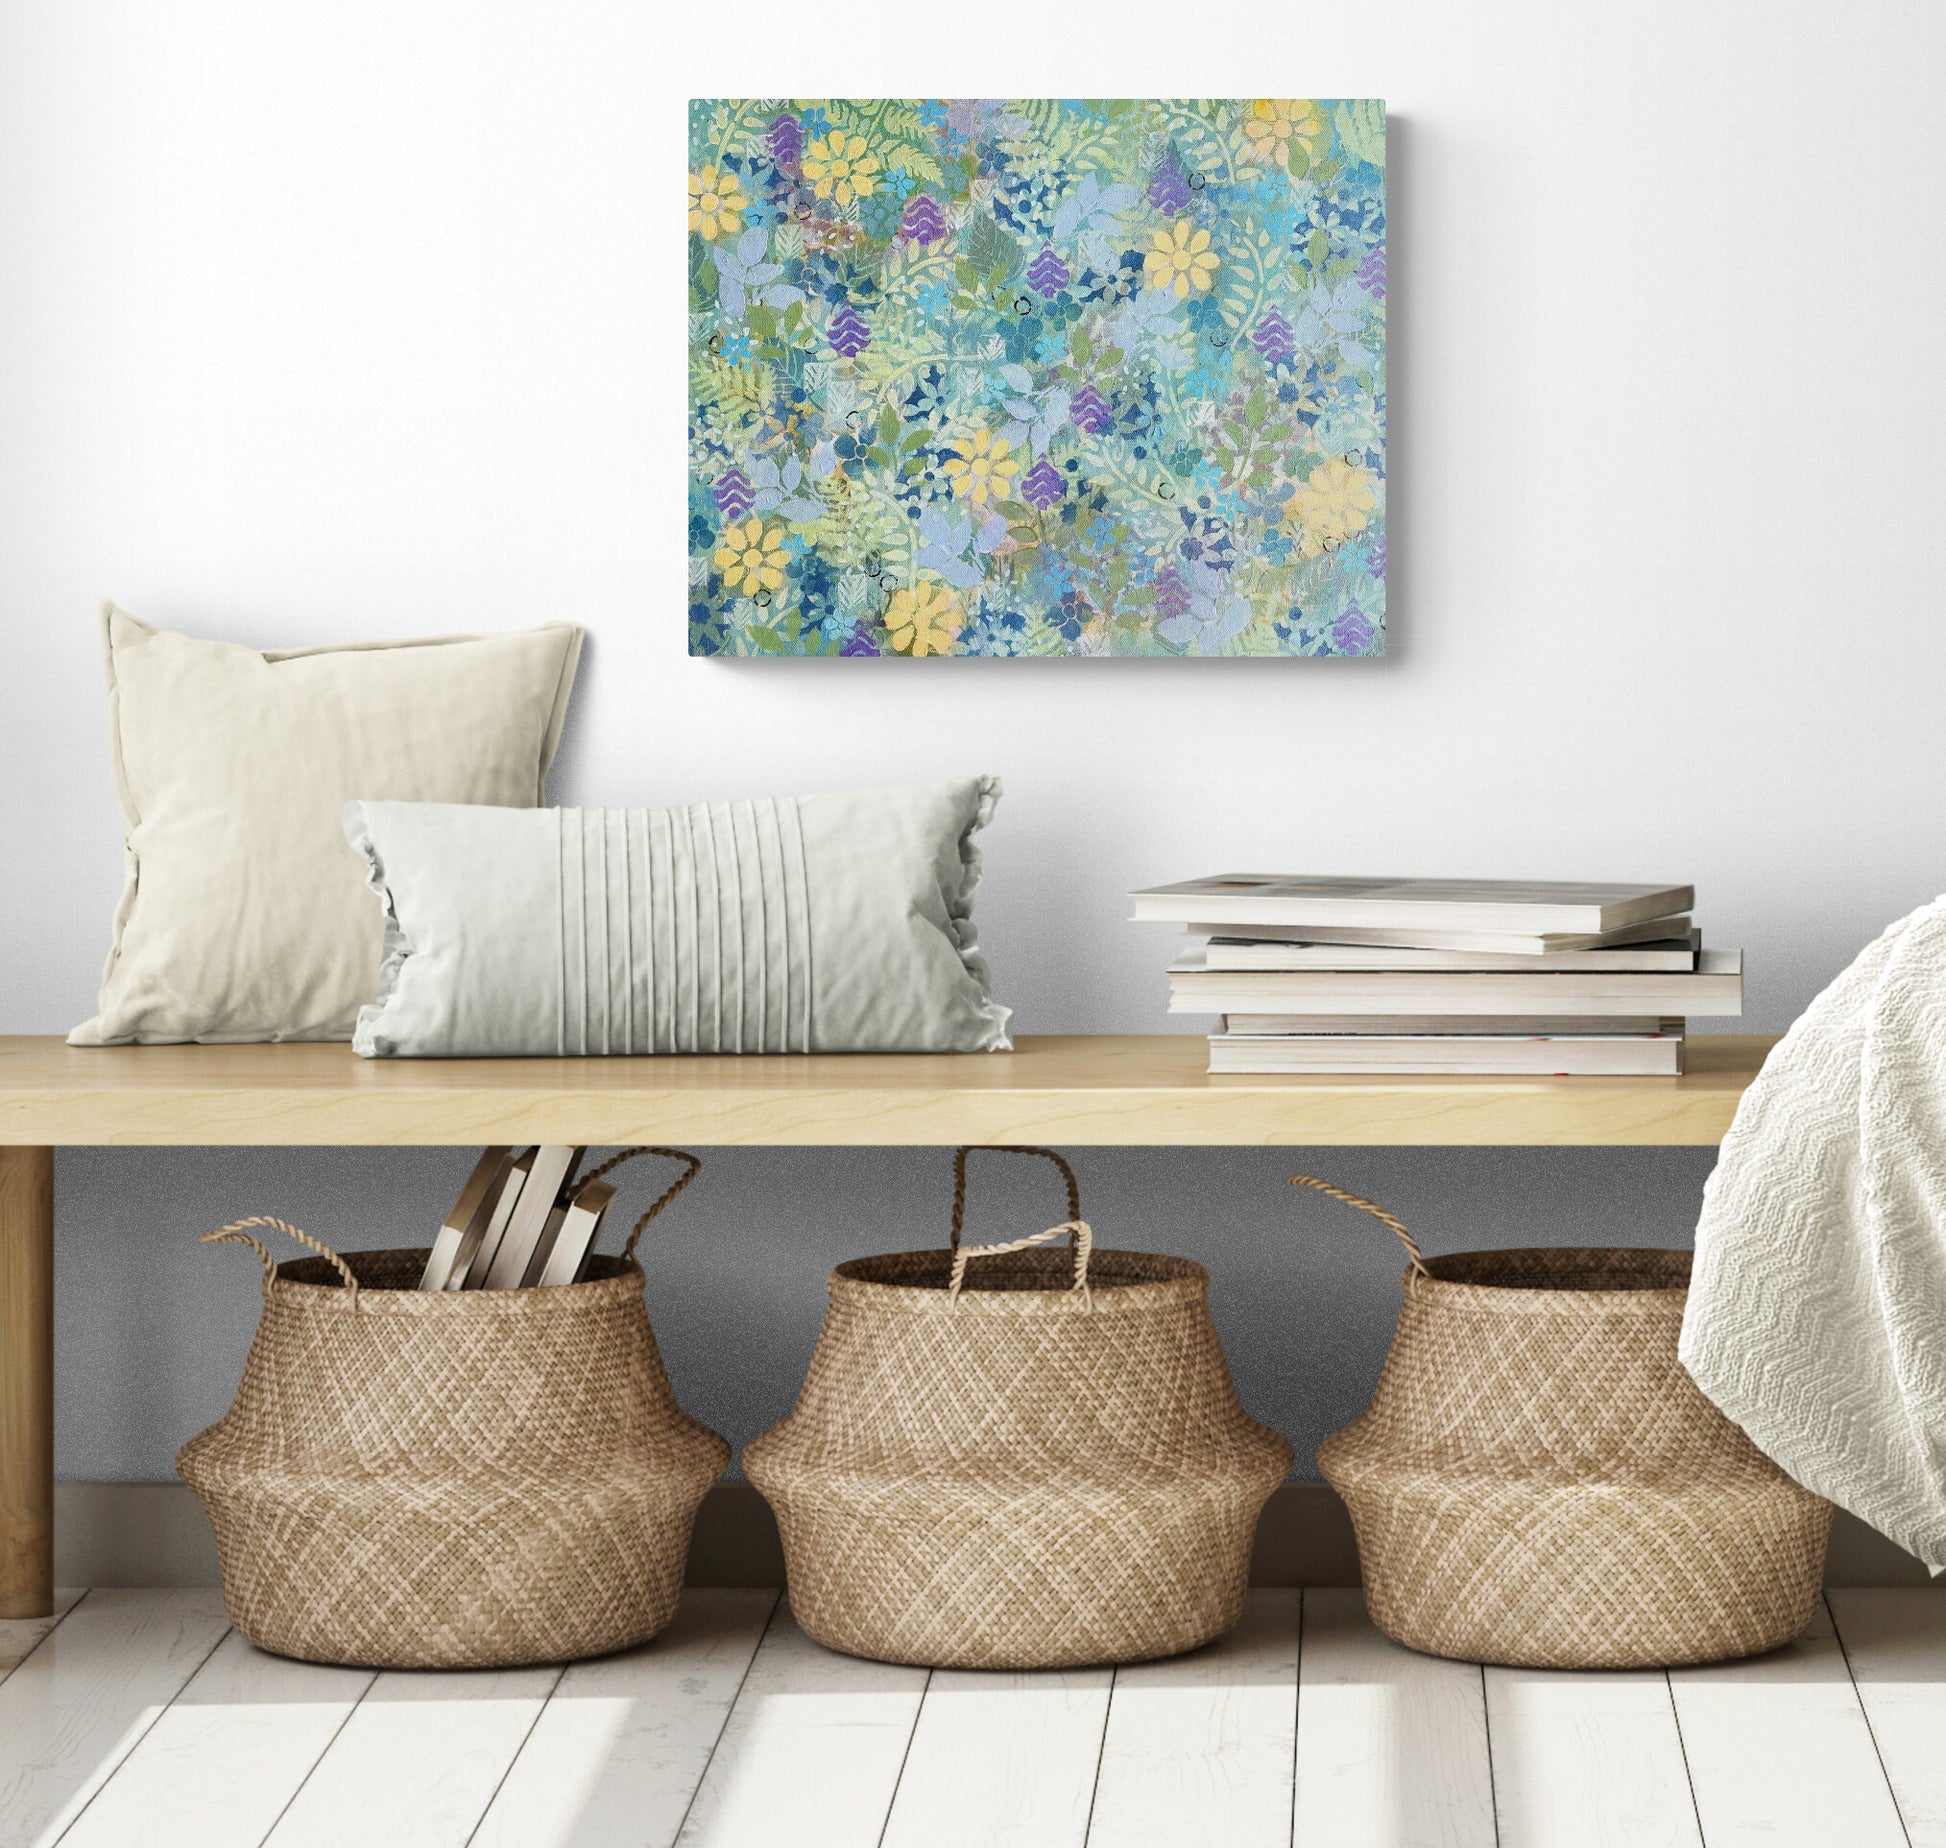 abstract floral painting on canvas sunny yellow flowers and small blue flowers green leaves purple accents refreshing jungle feel in room with bench and baskets below